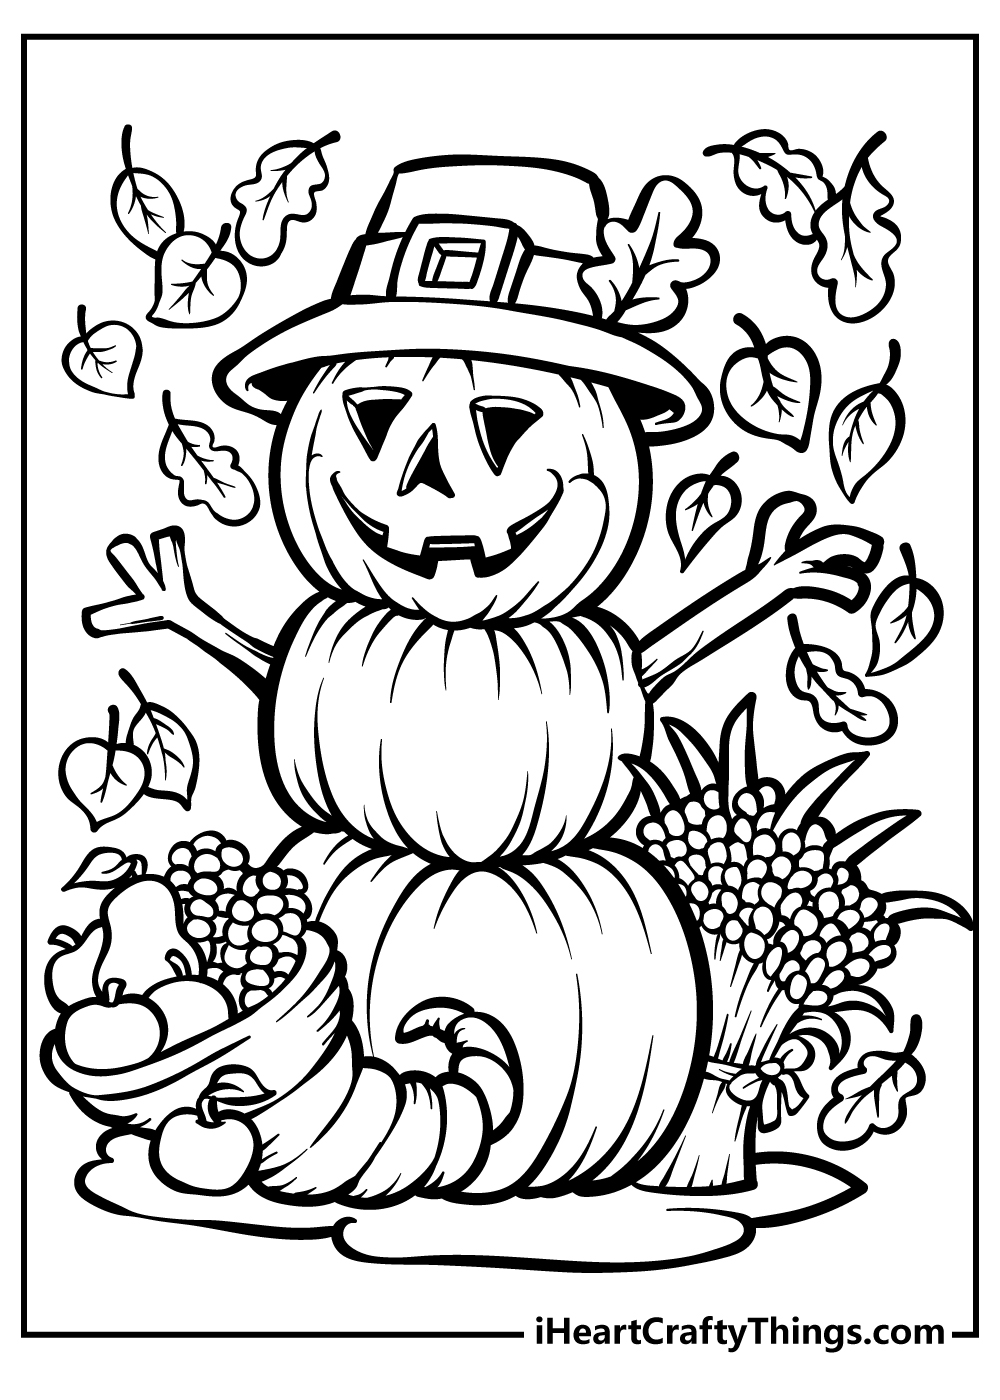 Printable Halloween Coloring Pages Updated 20